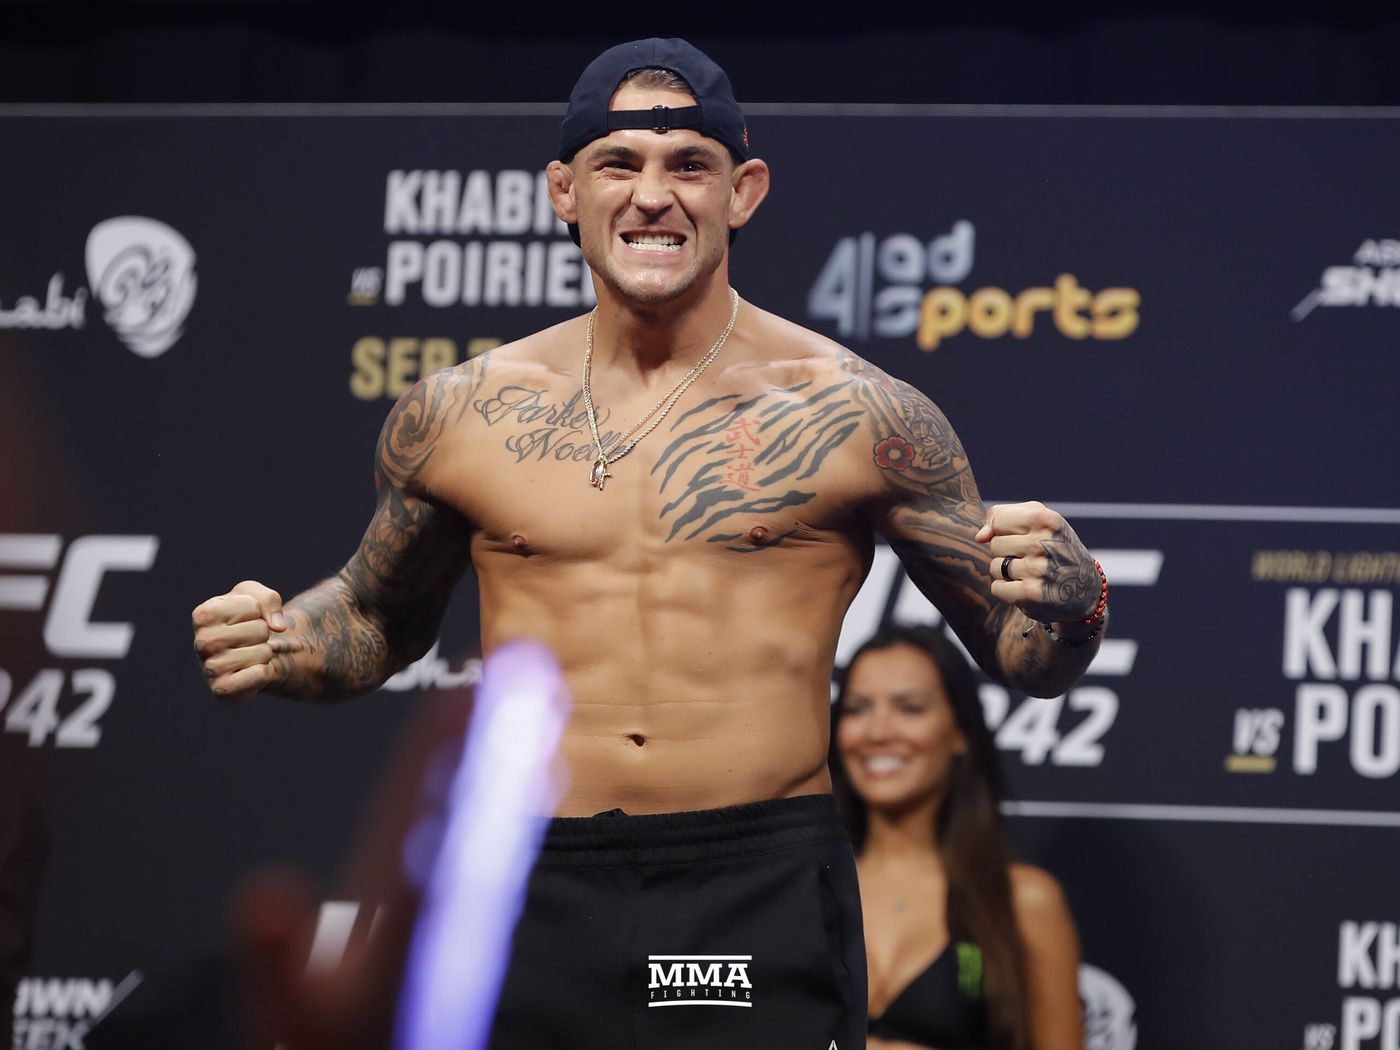 Dustin Poirier open to eventual move to 170 to face Nate Diaz: 'He's a guy I've always wanted to fight' - MMA Fighting